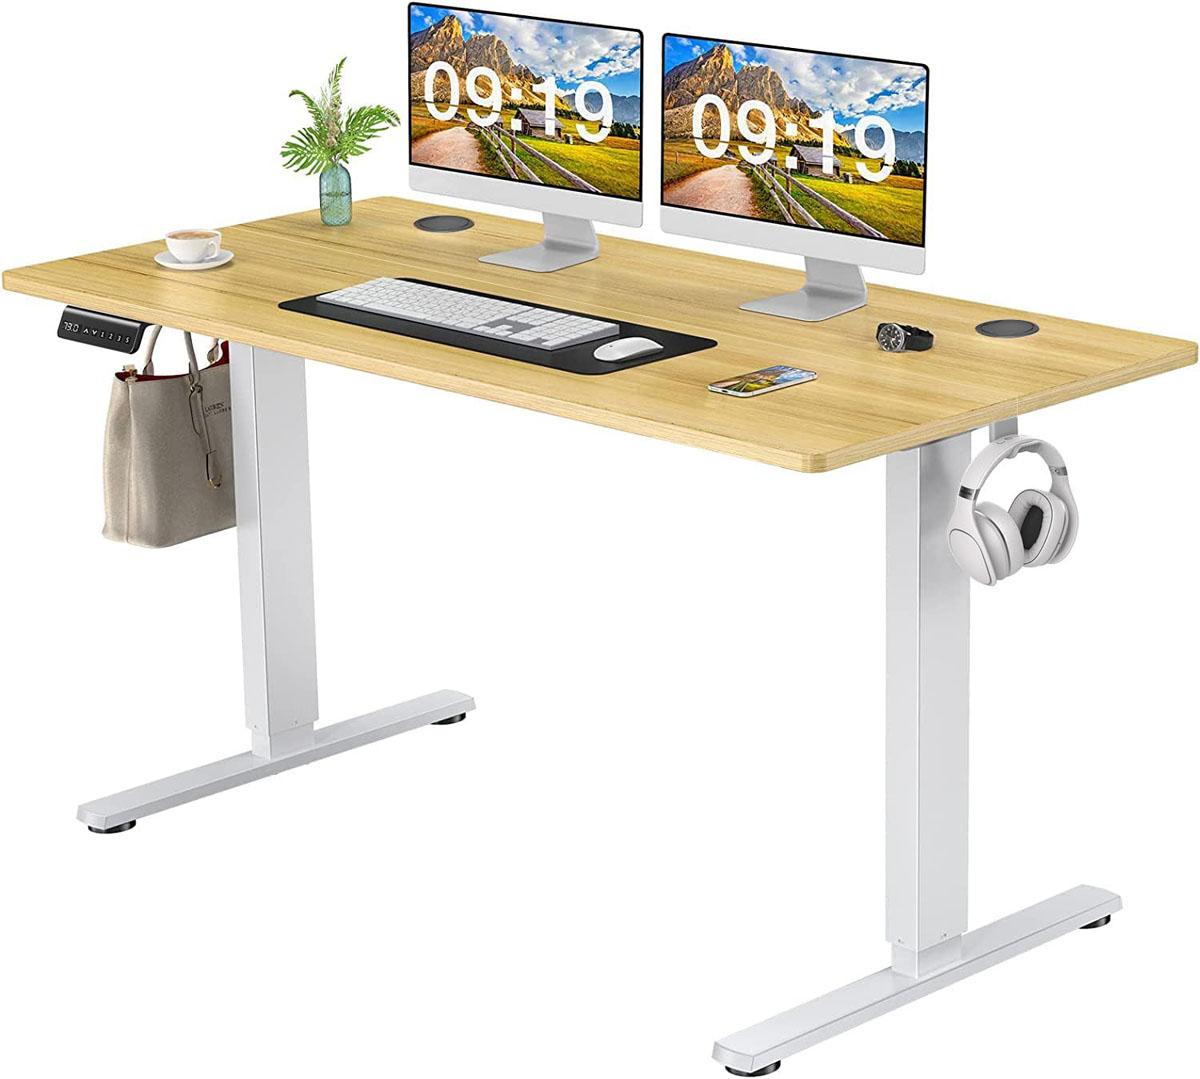 Sweetcrispy Electric Adjustable Height Standing Desks for $95.99 Shipped